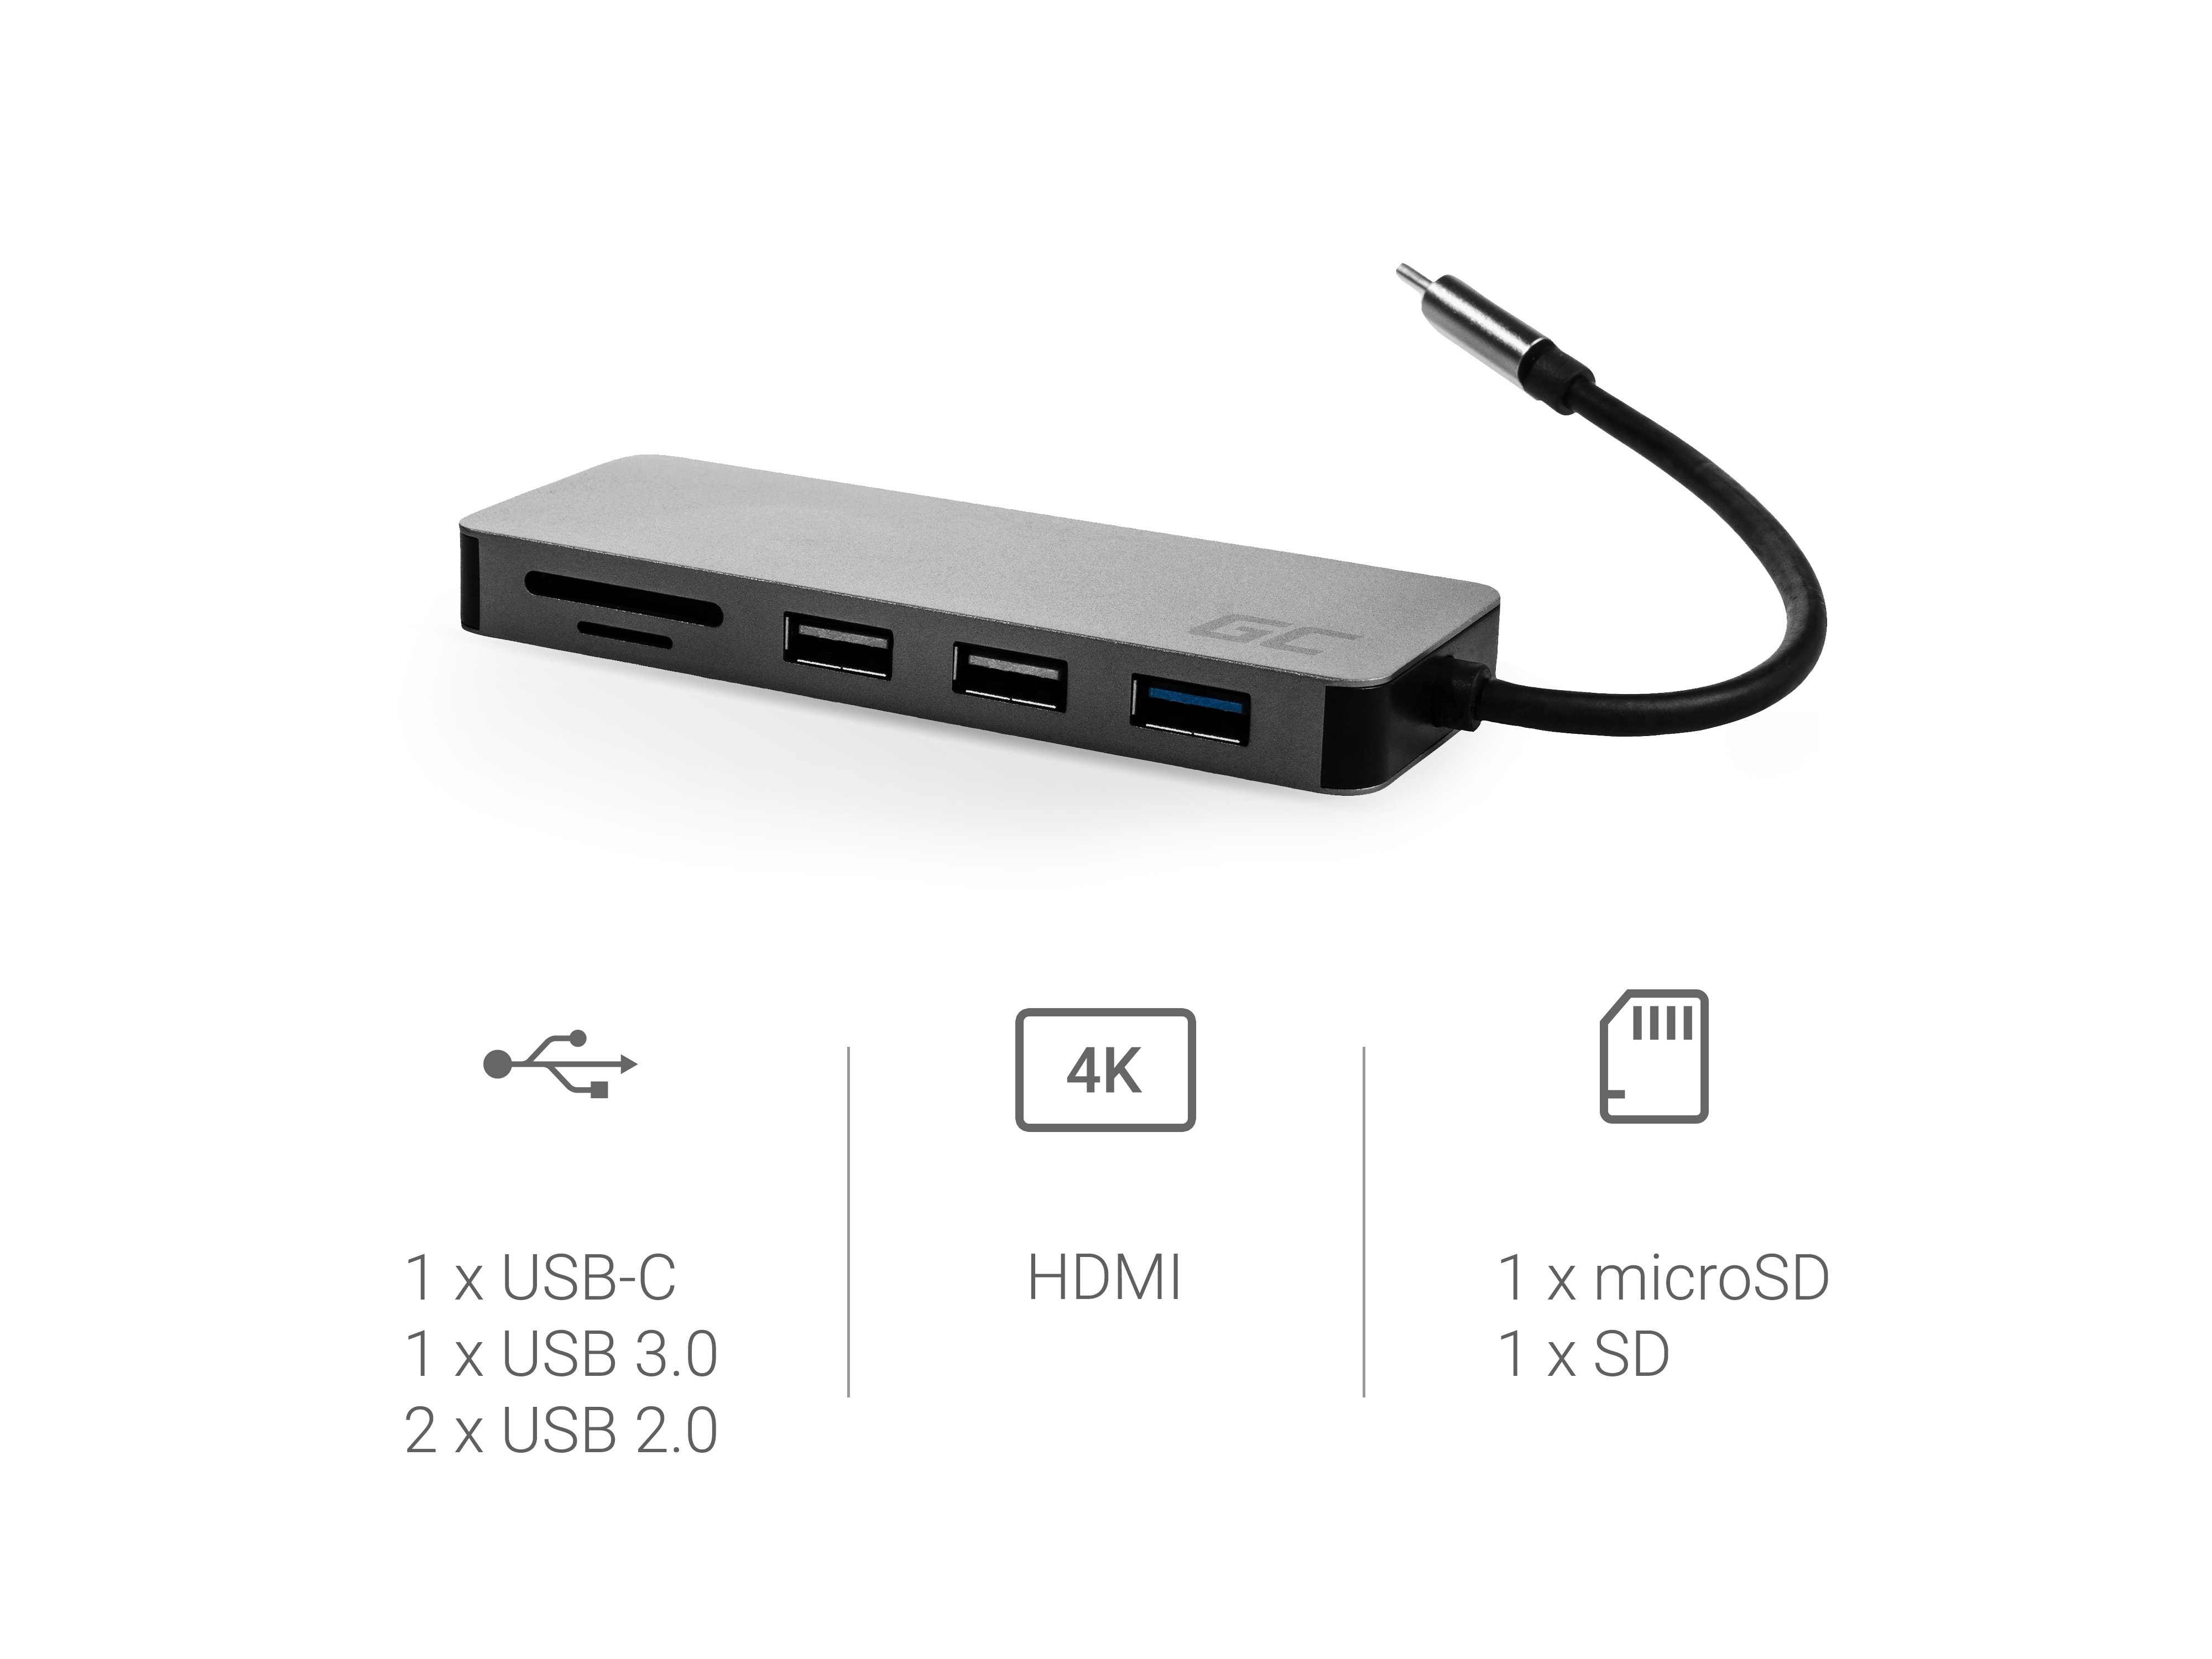 Dockingstation (AK50) Adapter, HUB USB-C HDMI Adapter Green Cell - 7 Ports für MacBook Pro, Dell XPS, Lenovo X1 Carbon und andere...